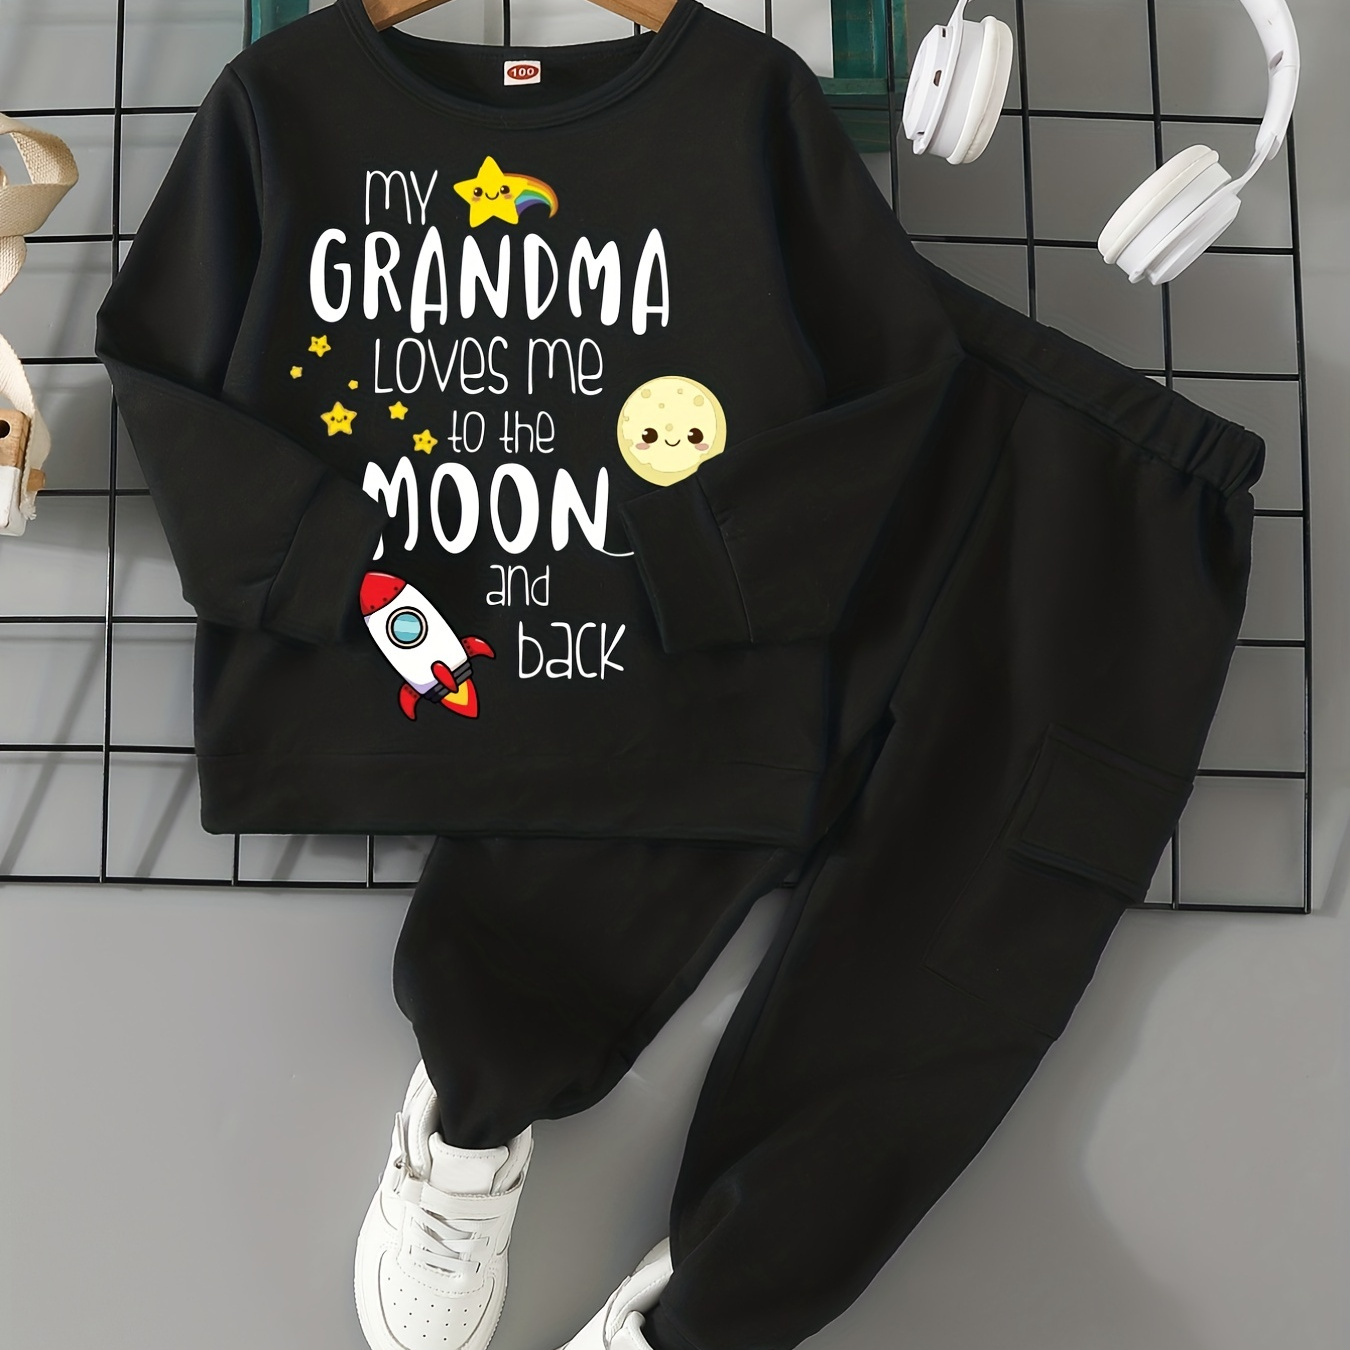 

2pcs Boy's Grandma Loves Me Print Outfit, Sweatshirt & Cargo Pants Set, Toddler Kid's Clothes For Spring Fall Outdoor